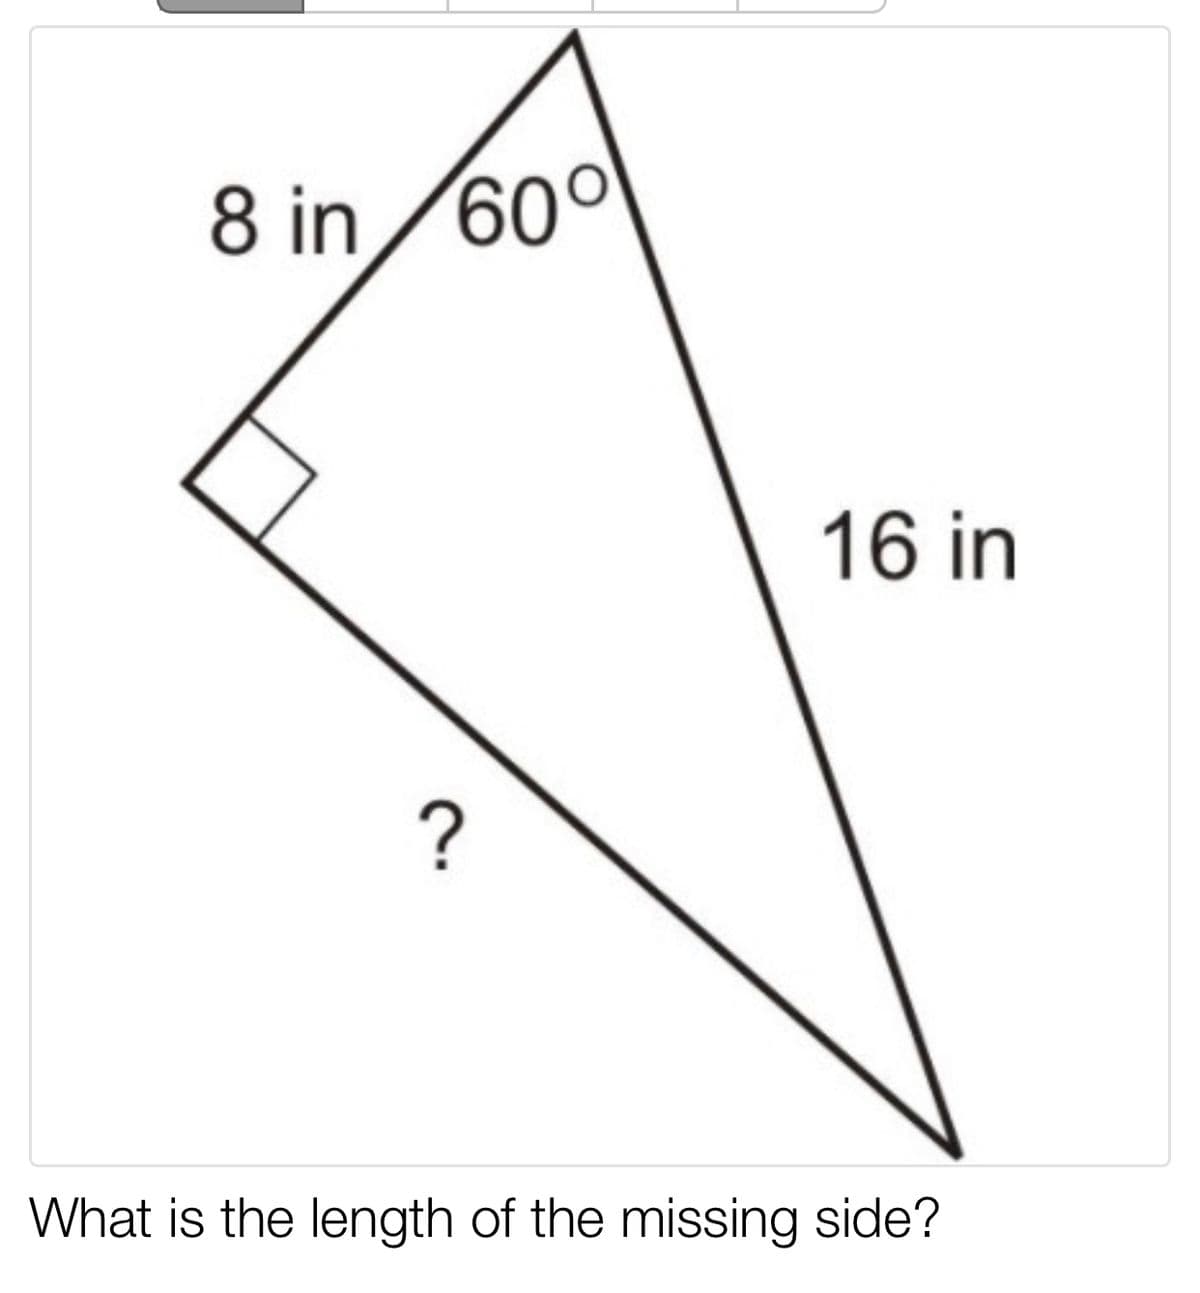 8 in /60°
16 in
What is the length of the missing side?
